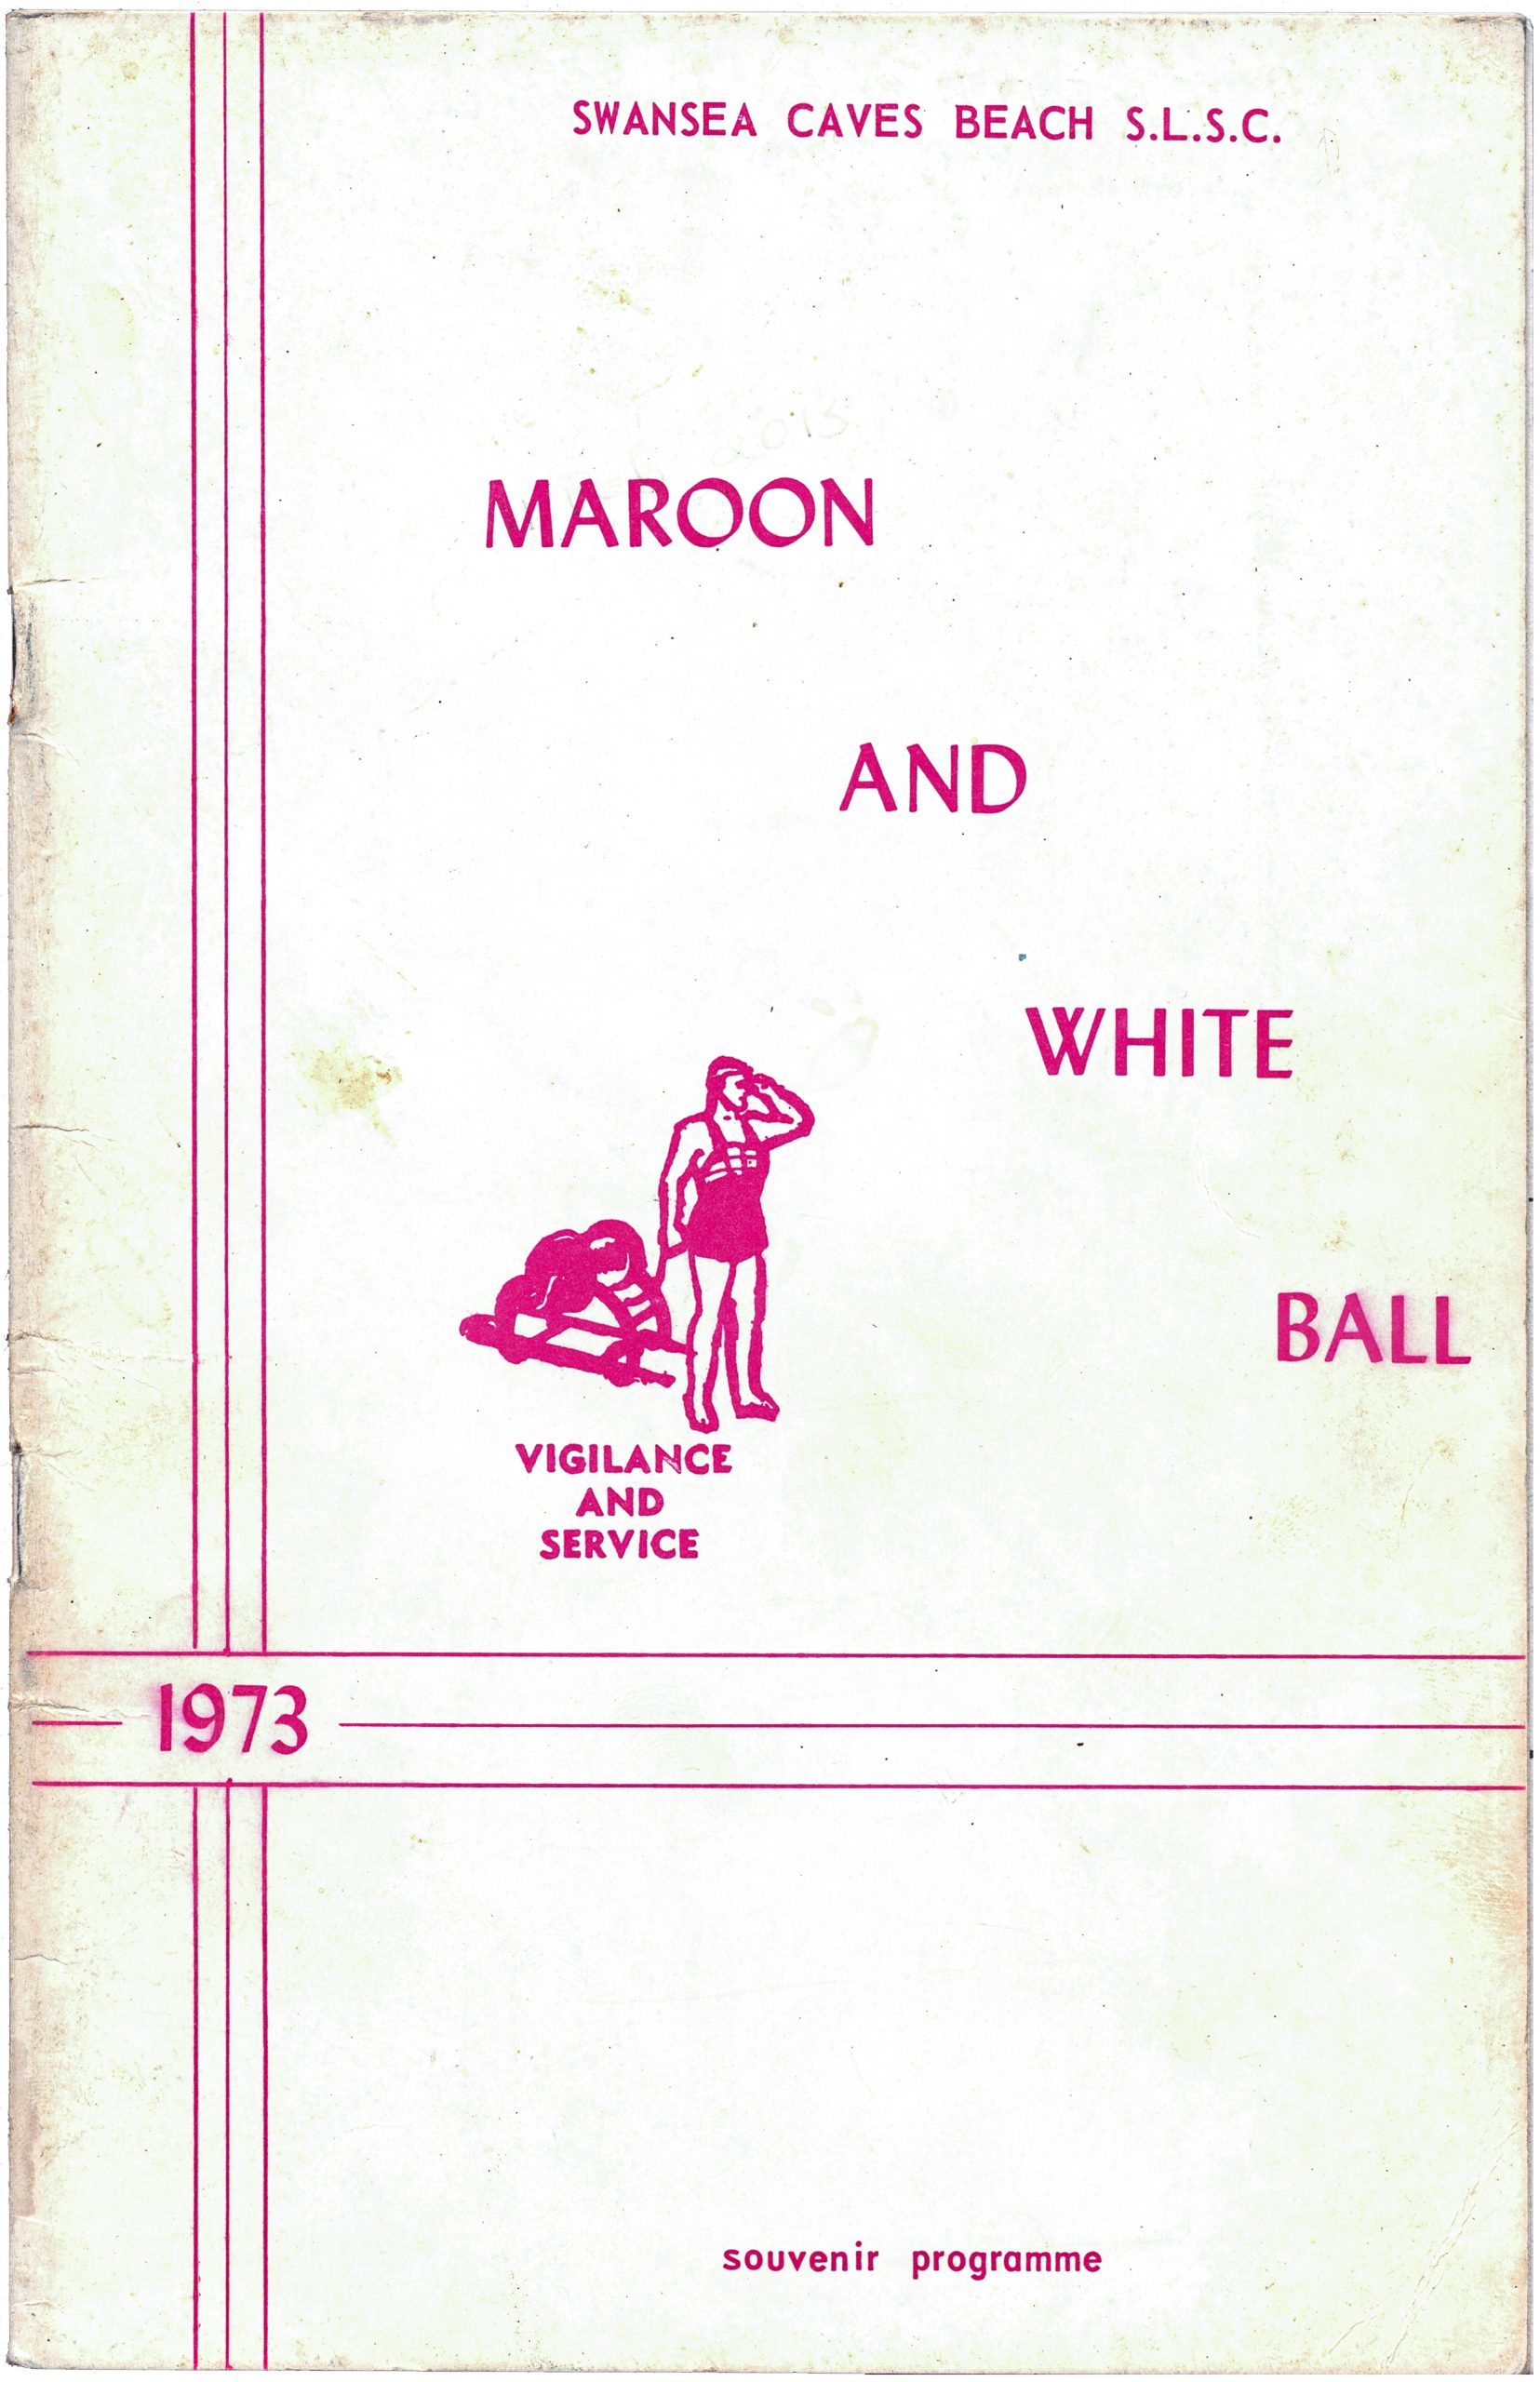 Cover for a programme for Swansea Caves Beach S.L.S.C. "Maroon and White Ball." The text is in bright pink on a, now yellowed, white page. It includes an illustration of a surf life saver looking towards the ocean with a caption, "VIGILANCE AND SERVICE."